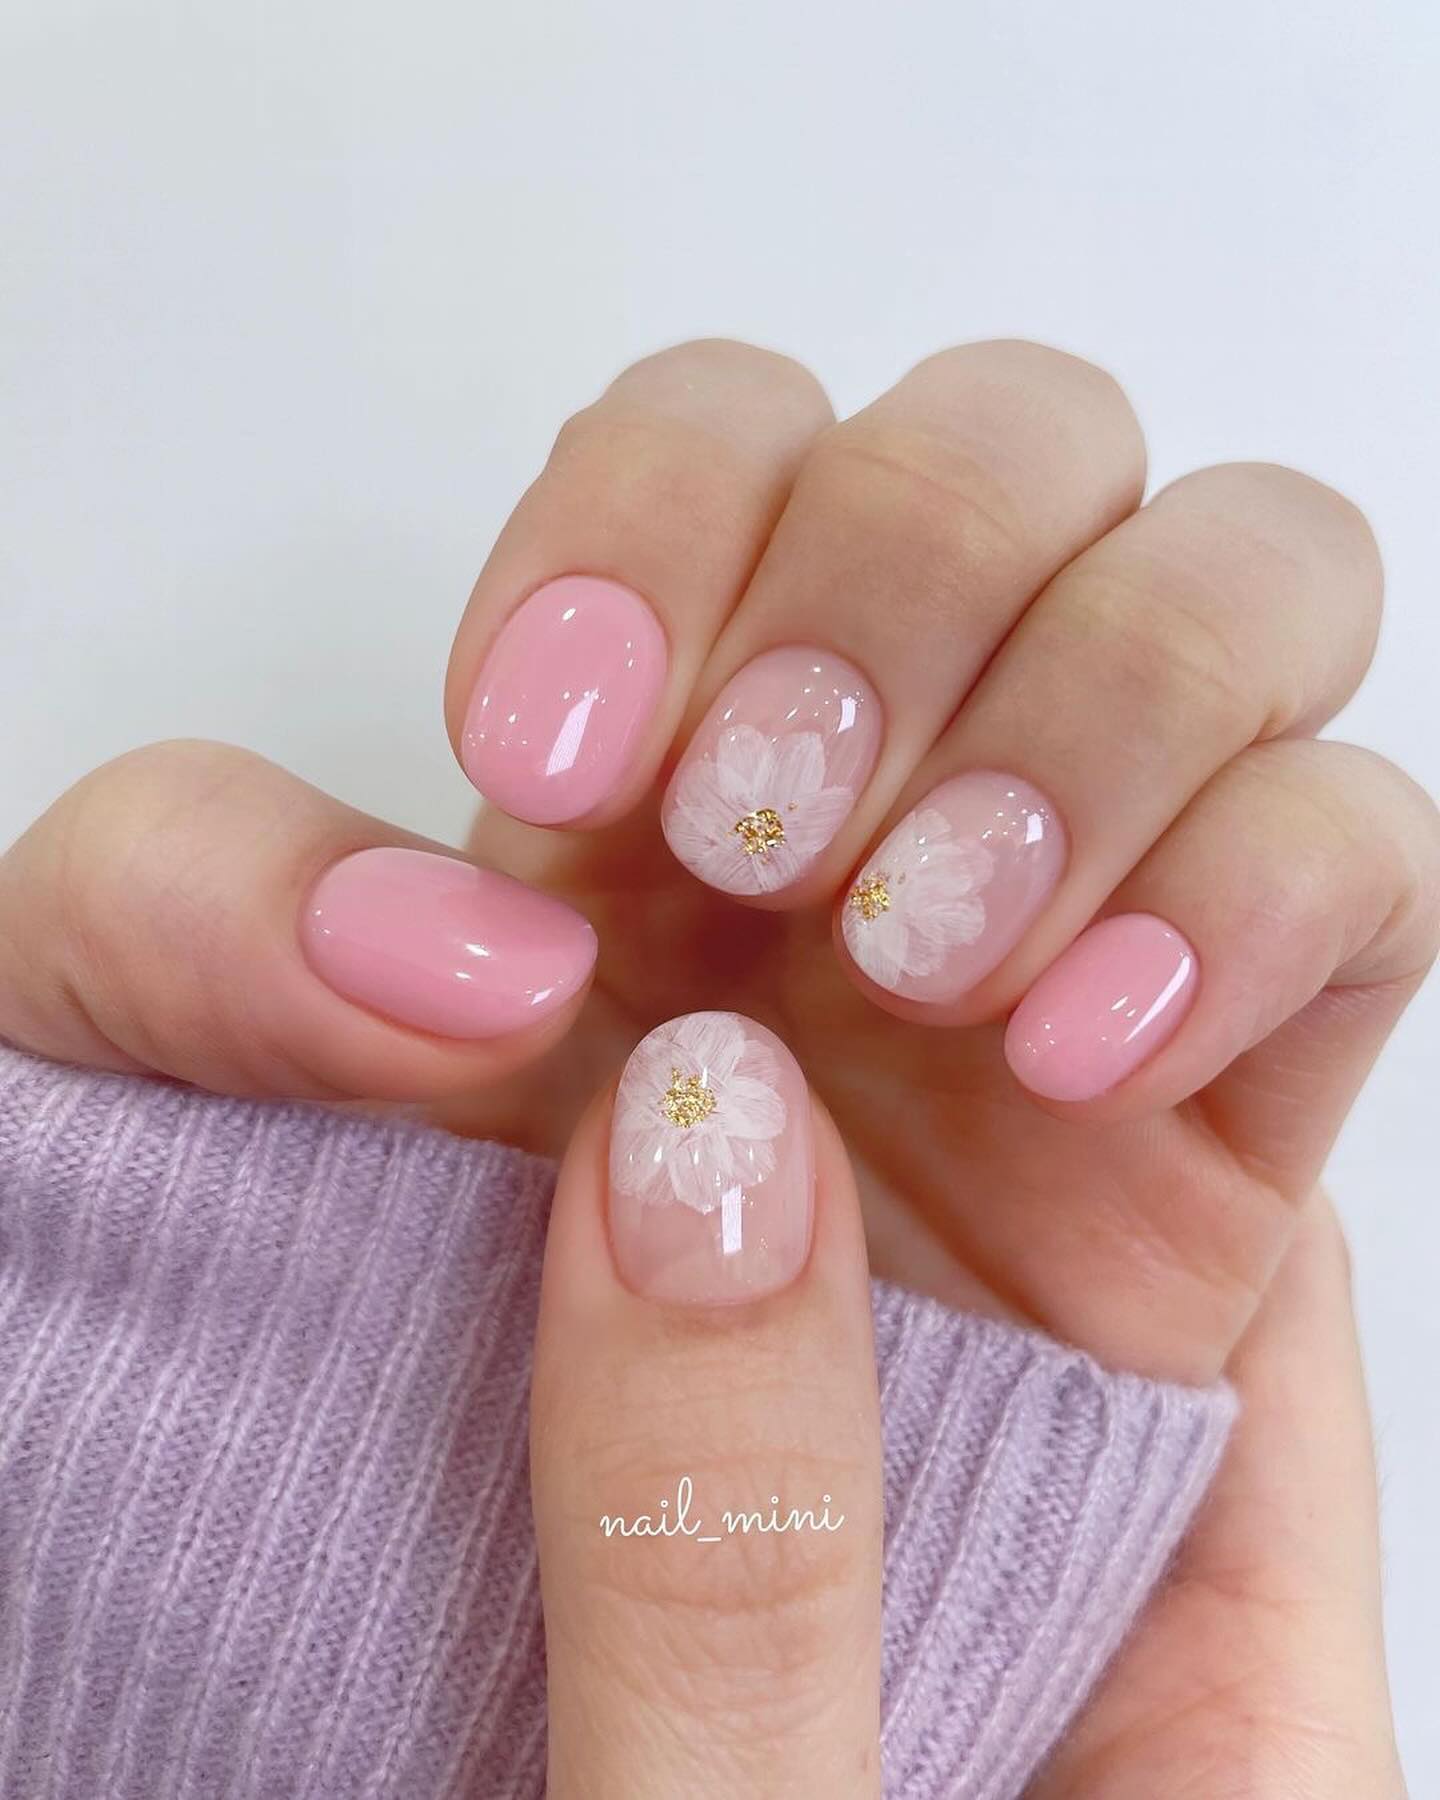 100+ Short Nail Designs You’ll Want To Try This Year images 22